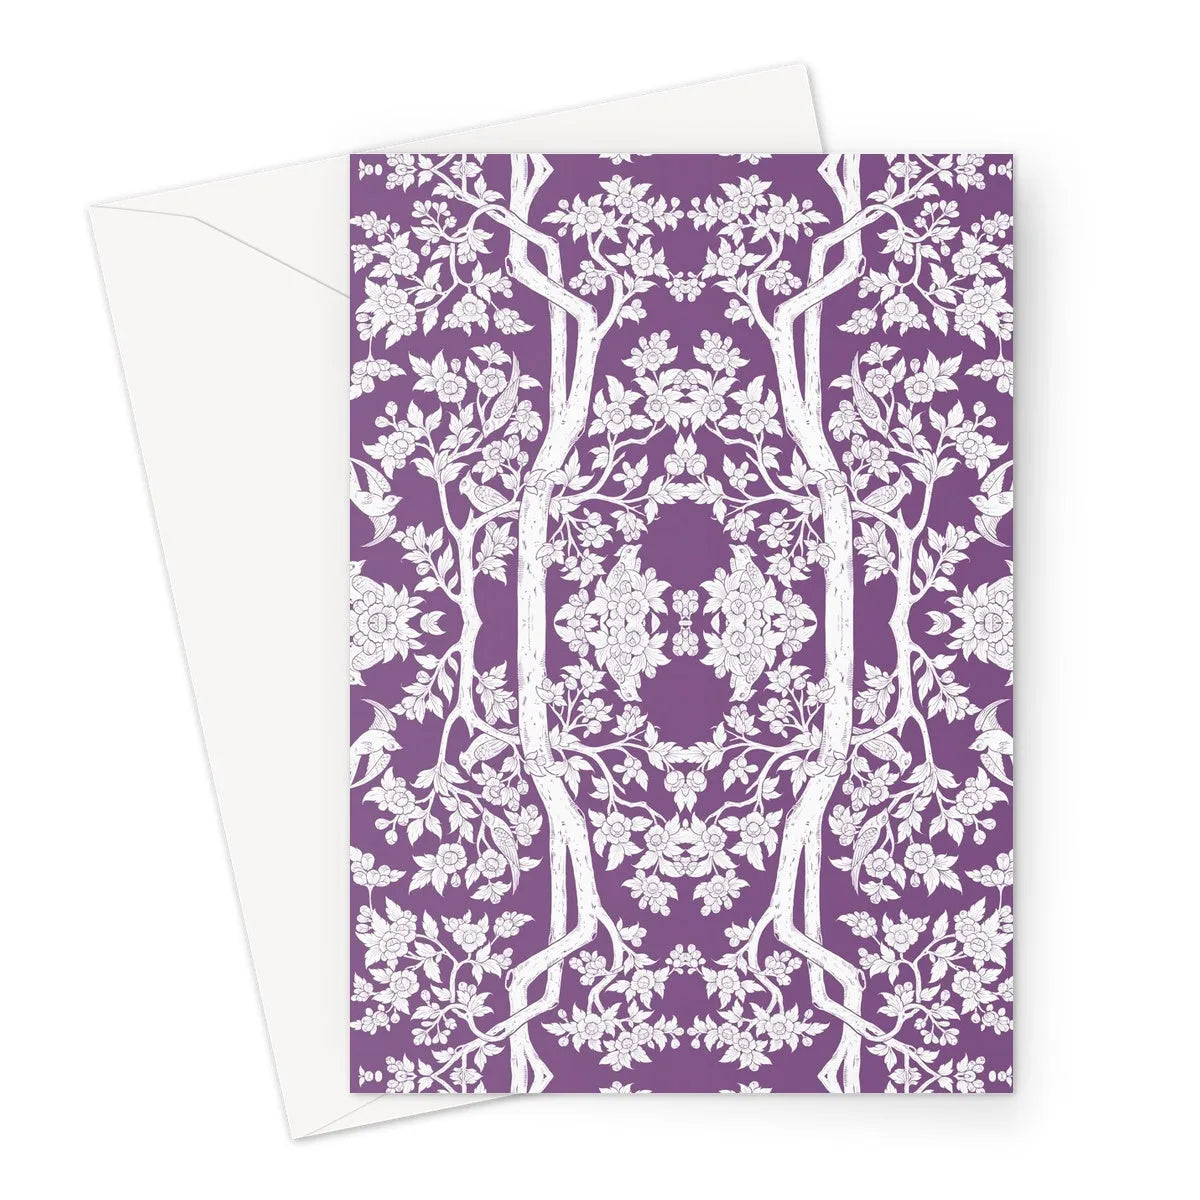 Aviary Purple Greeting Card - A5 Portrait / 1 Card - Greeting & Note Cards - Aesthetic Art